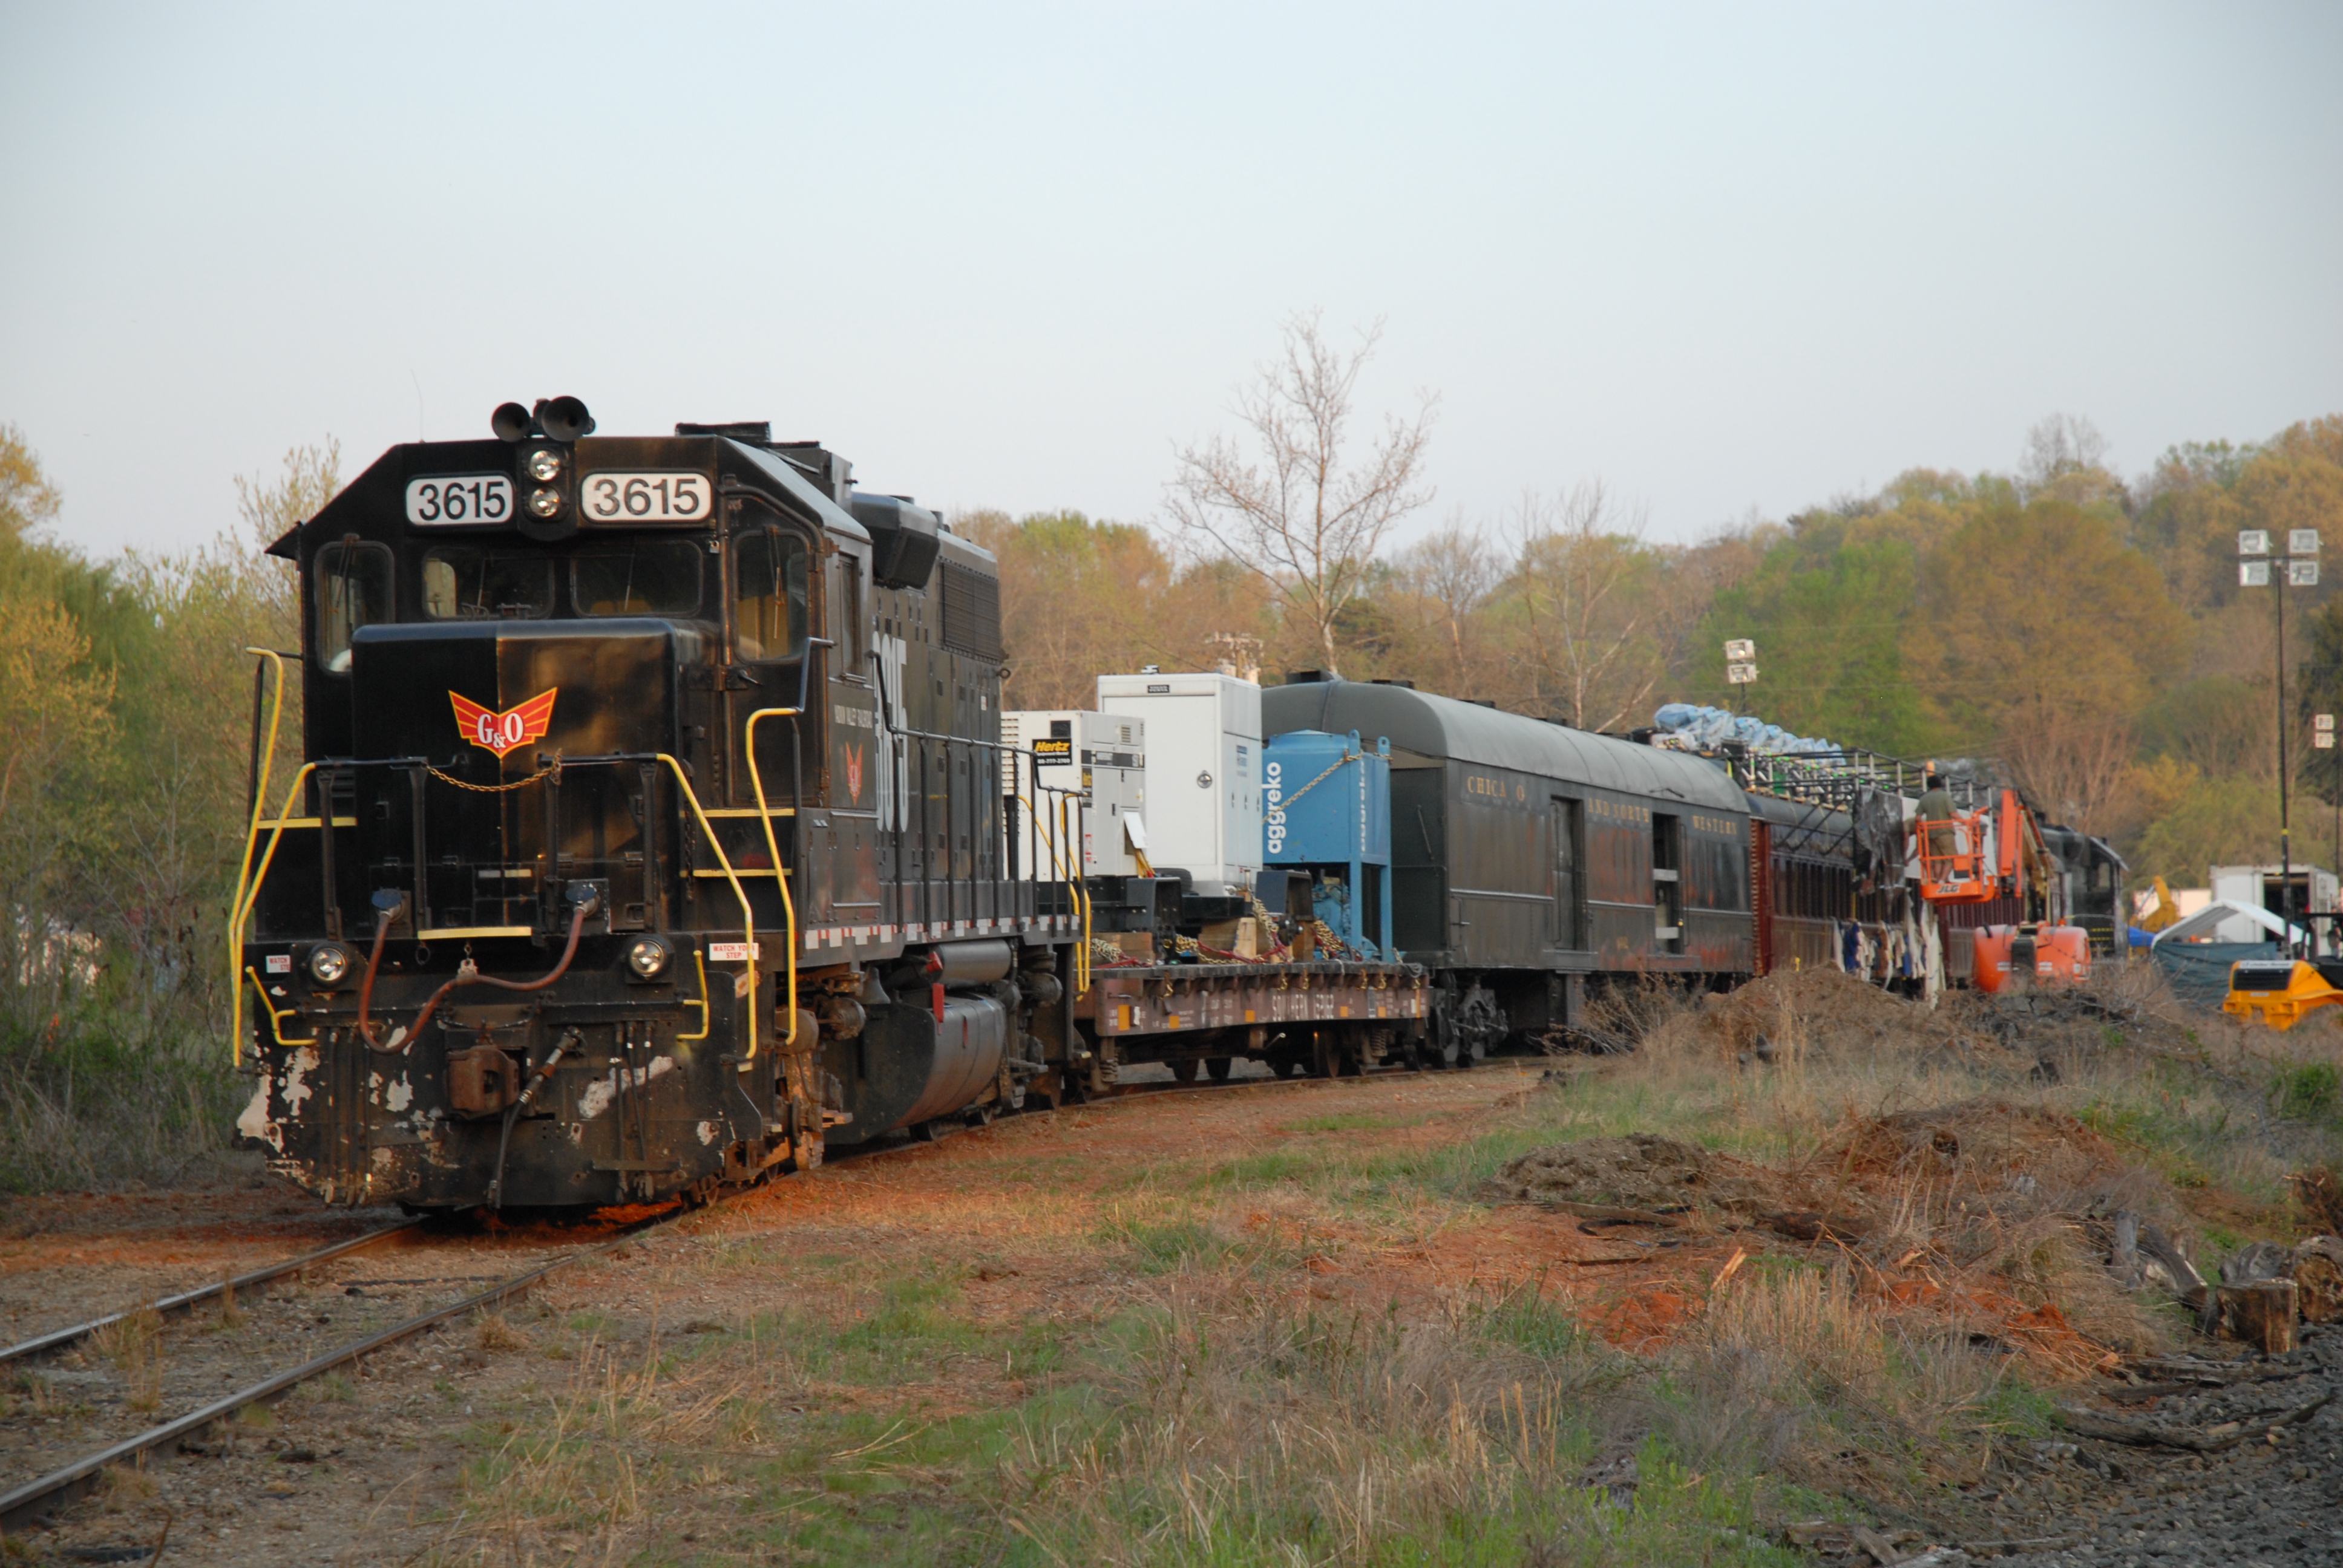 On location. Leatherheads. Yadkin Valley Railroad (YVRR). 2006. The LH movietrains prepares to depart Donnaha Siding for another long and flawless shoot day. YVRR operated LH's movietrain for 4 days of on-time and safe production work.